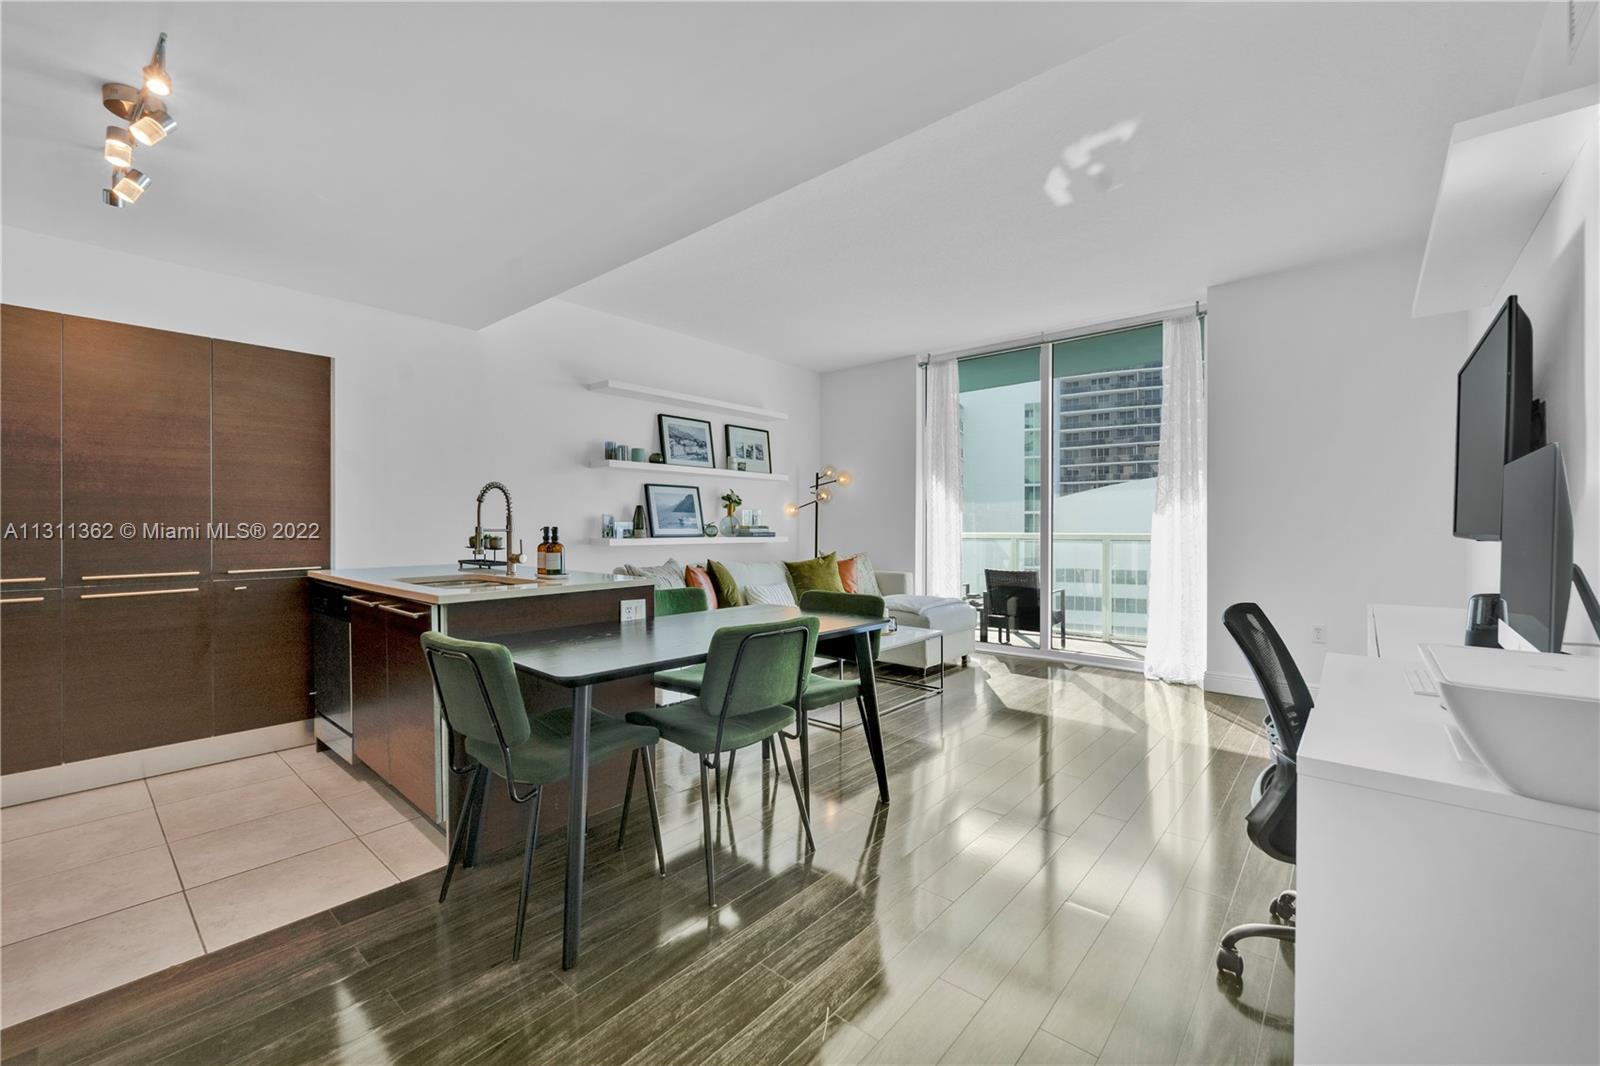 CENTRALLY LOCATED! Luxury condo 1 bed 1,5 bath in Quantum of the Bay across the street from Margaret